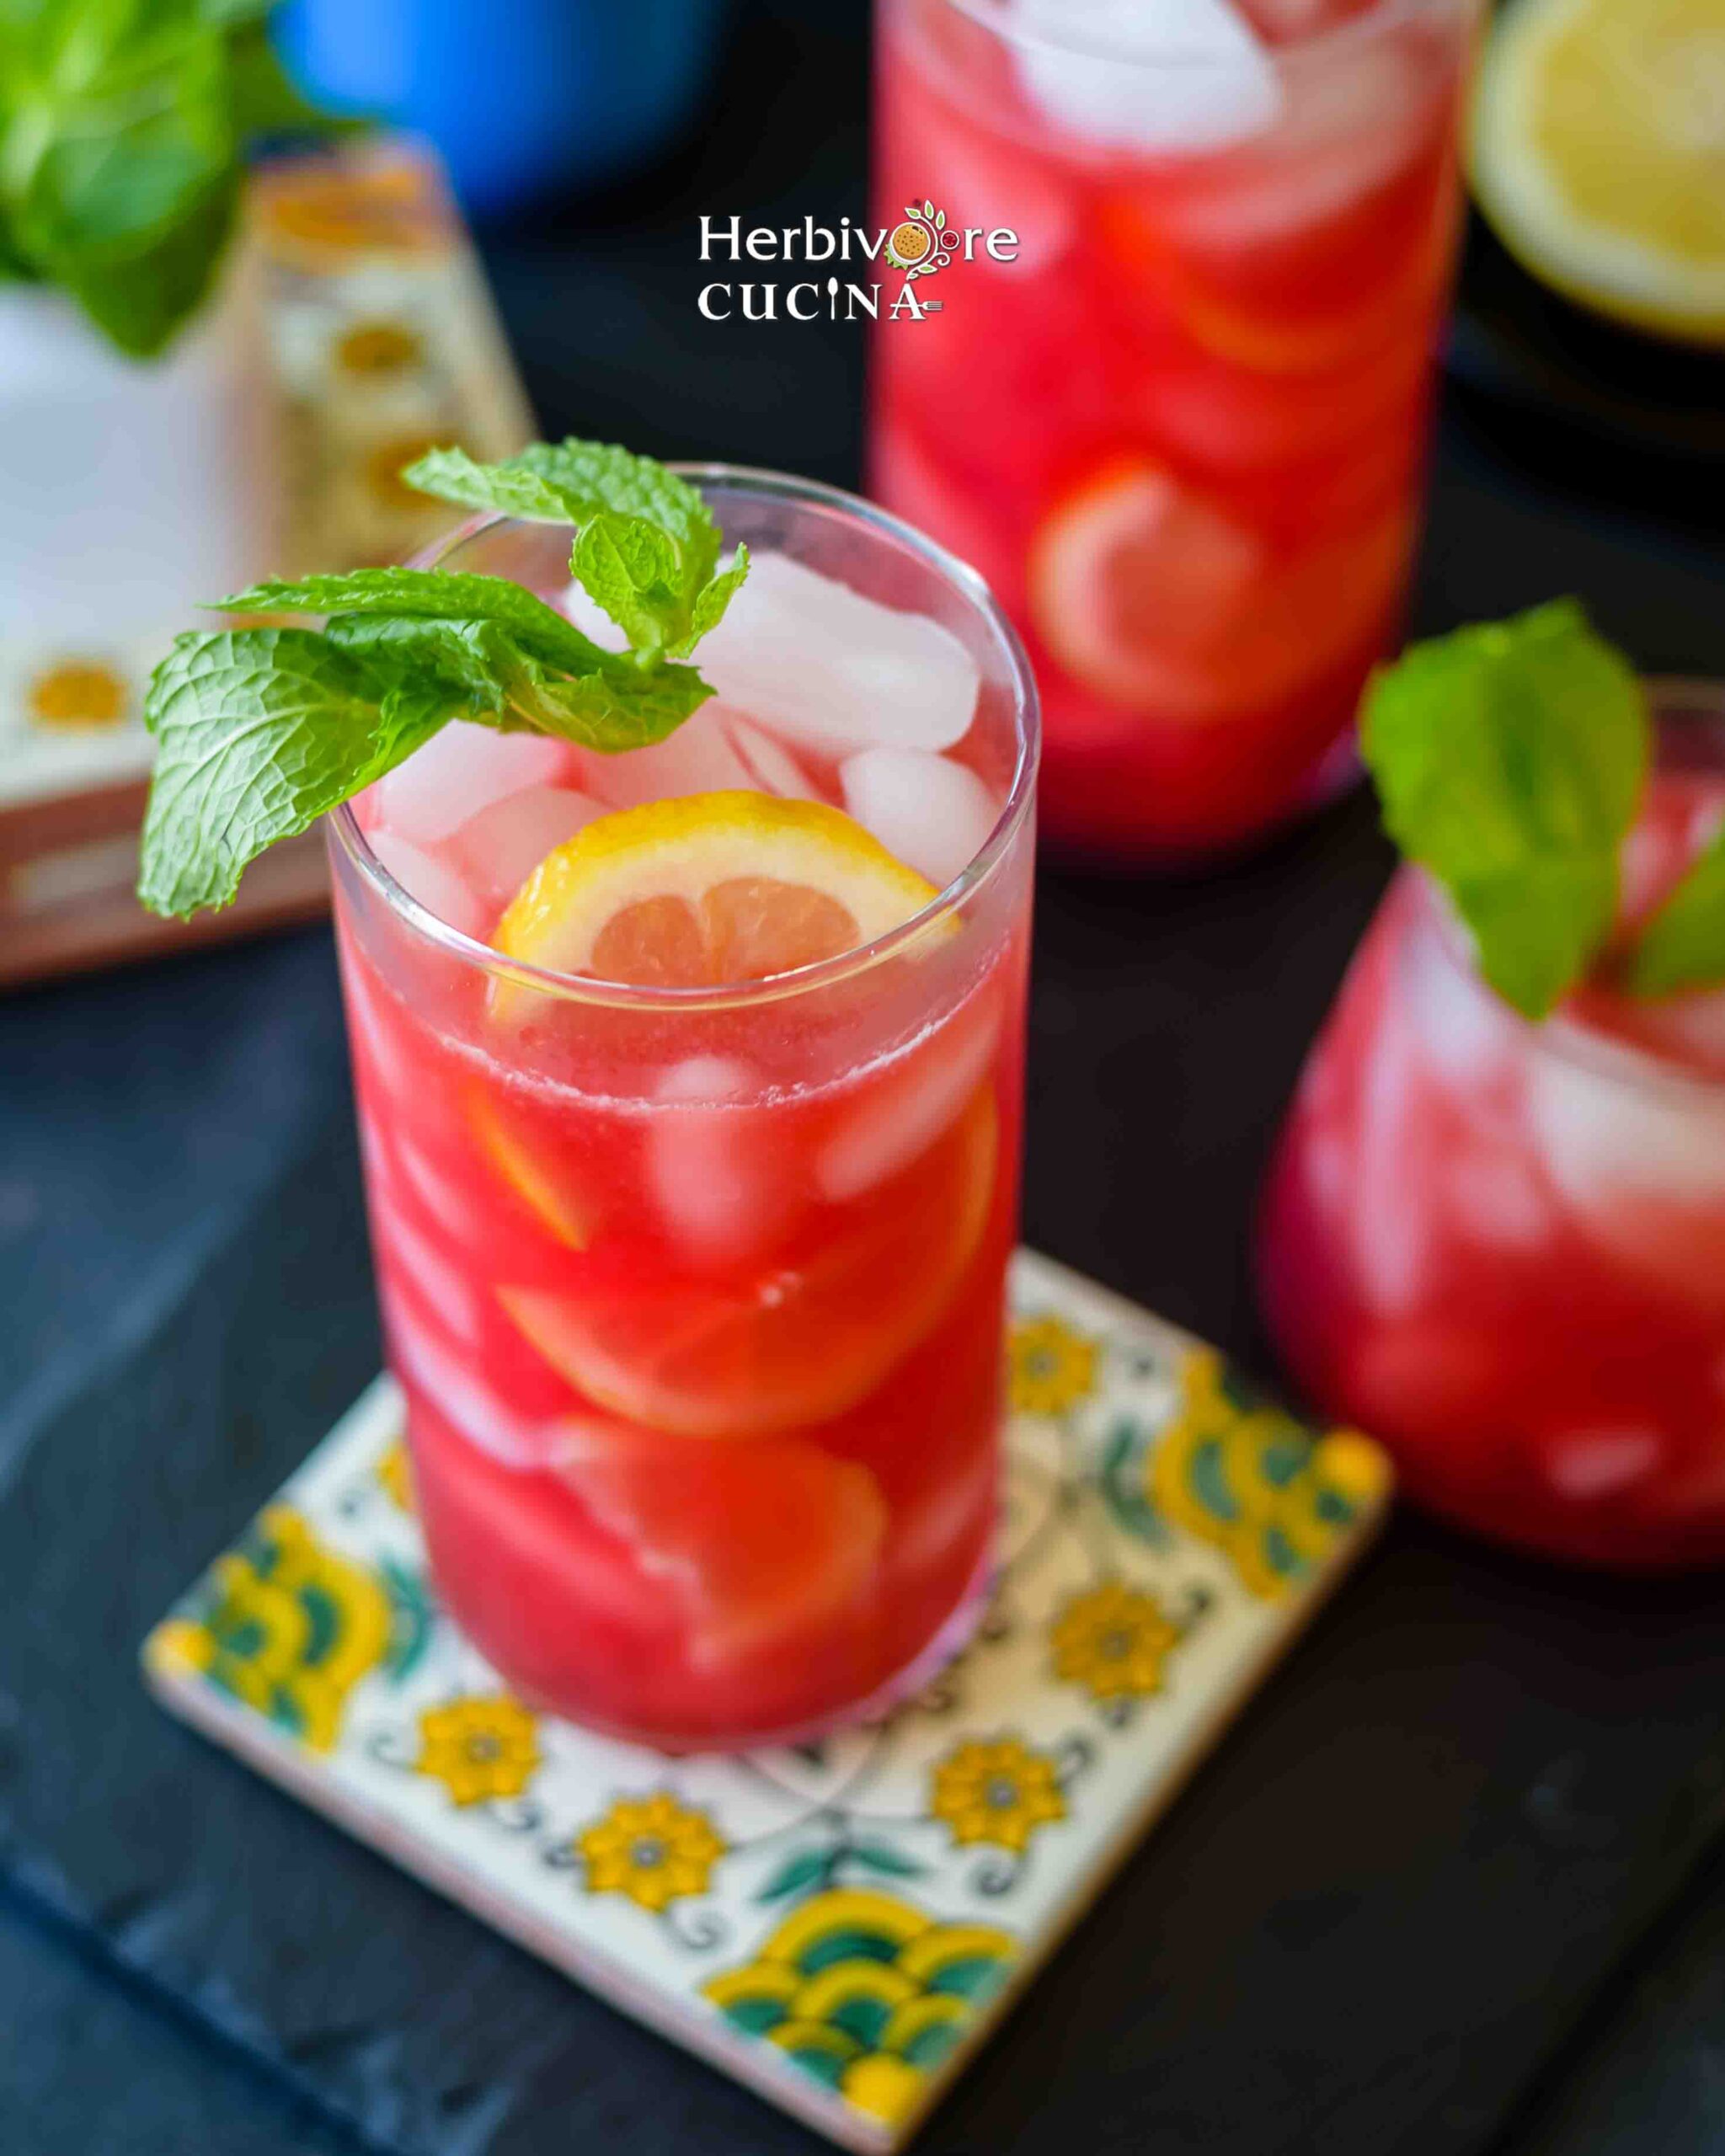 Side view of glass filled with ice and prickly pear lemonade topped with mint leaves and lemons on a colored coaster and slate platter.